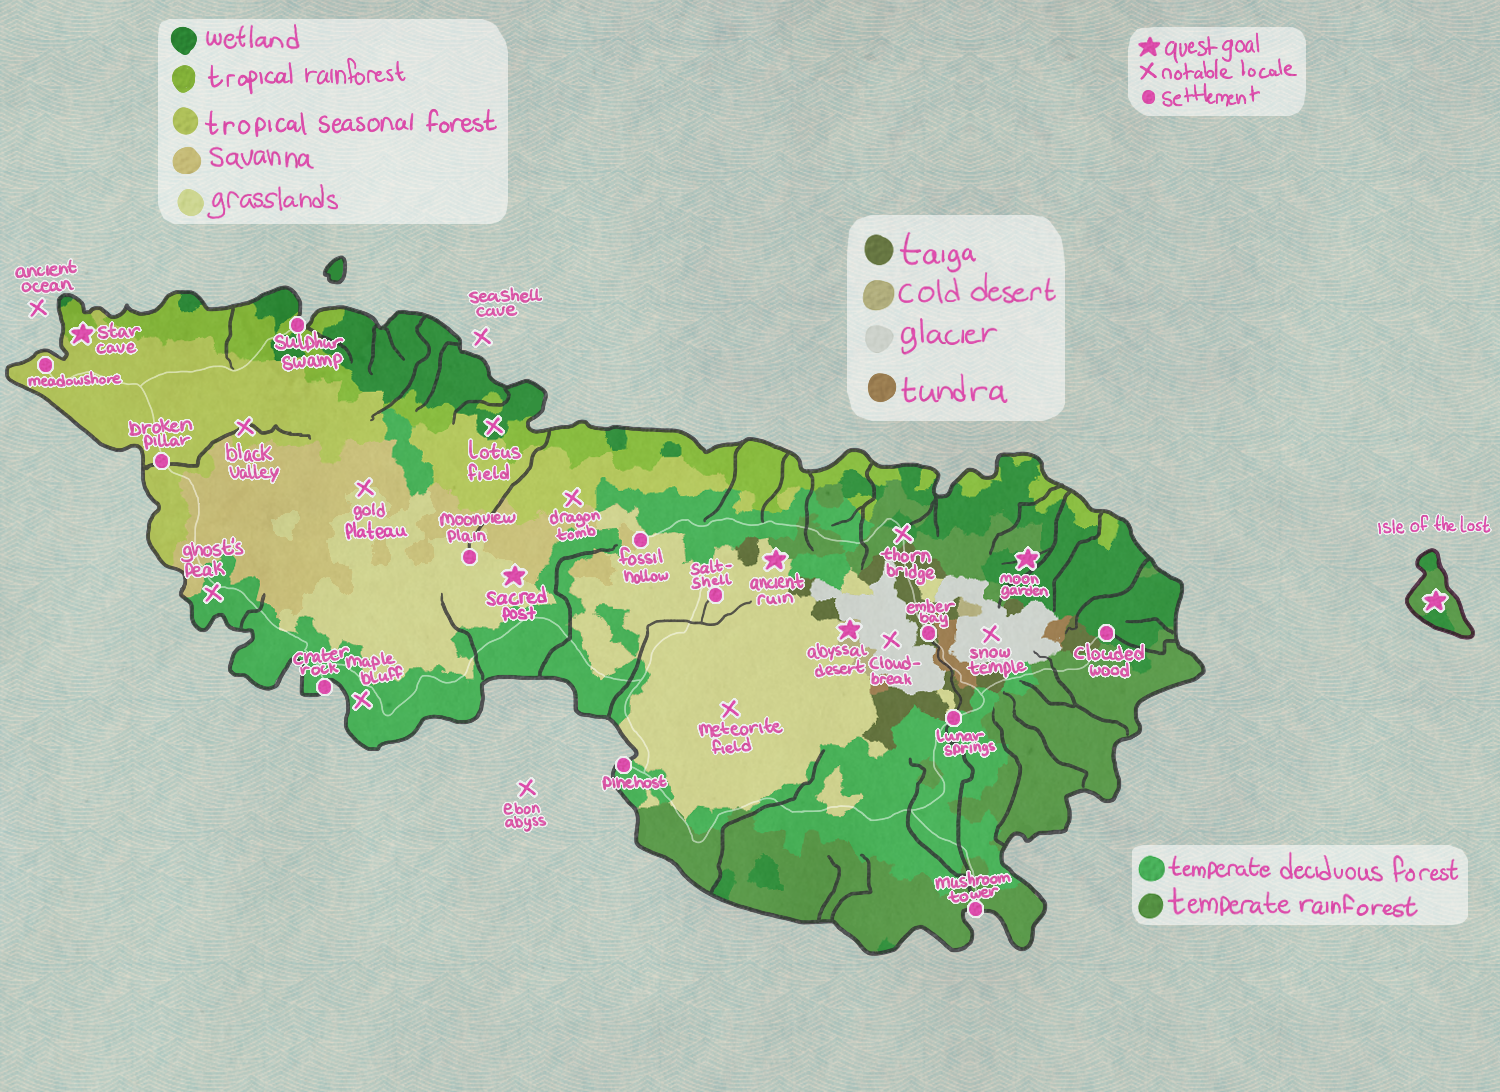 a map of the island. biomes and points of interest are marked.